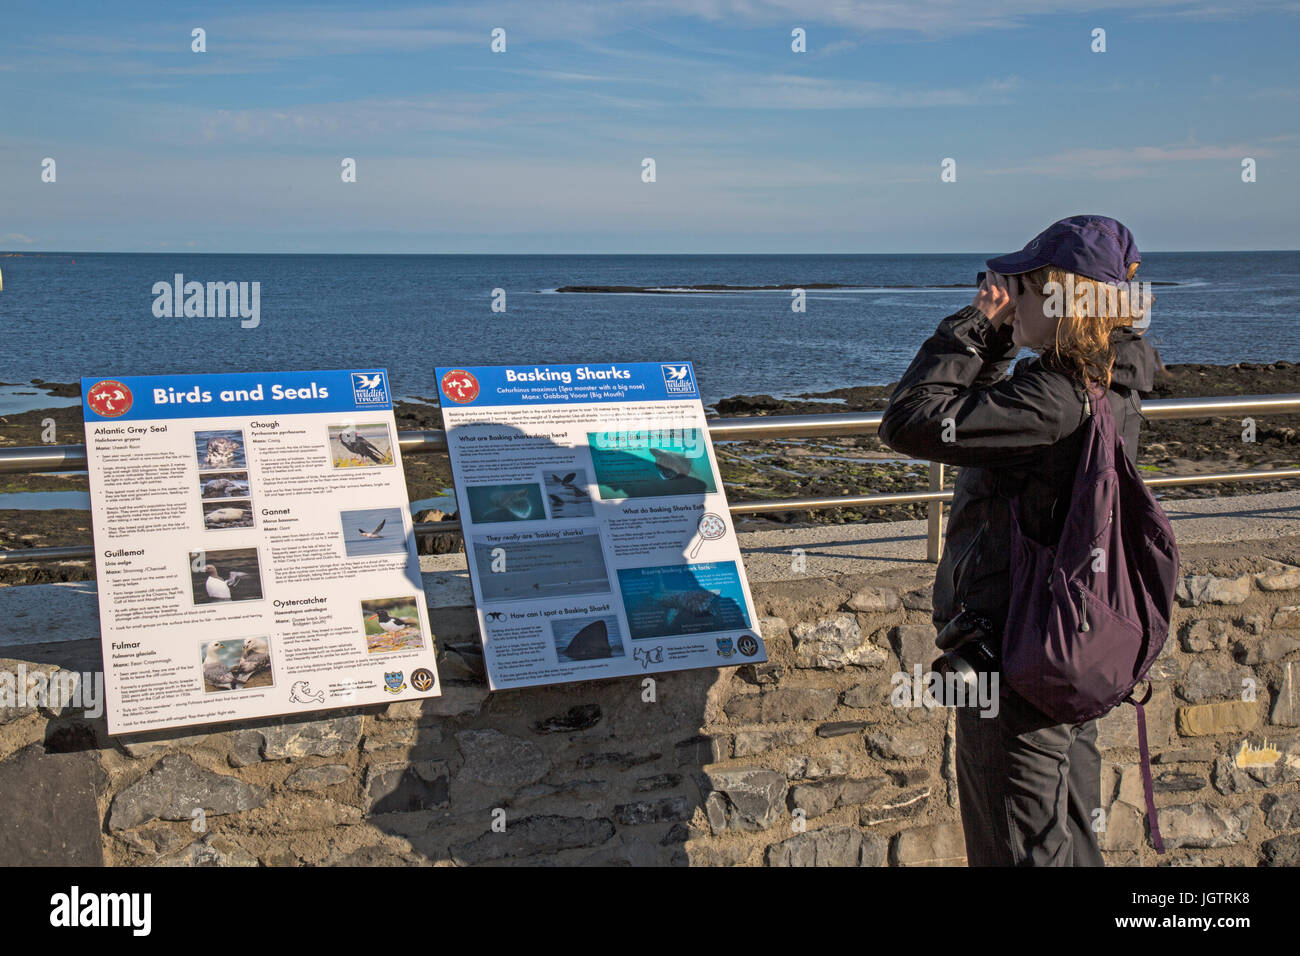 Female tourist using binoculars to look for basking sharks, seals, and birds, on the harbour in Castletown on The Isle of man. Stock Photo